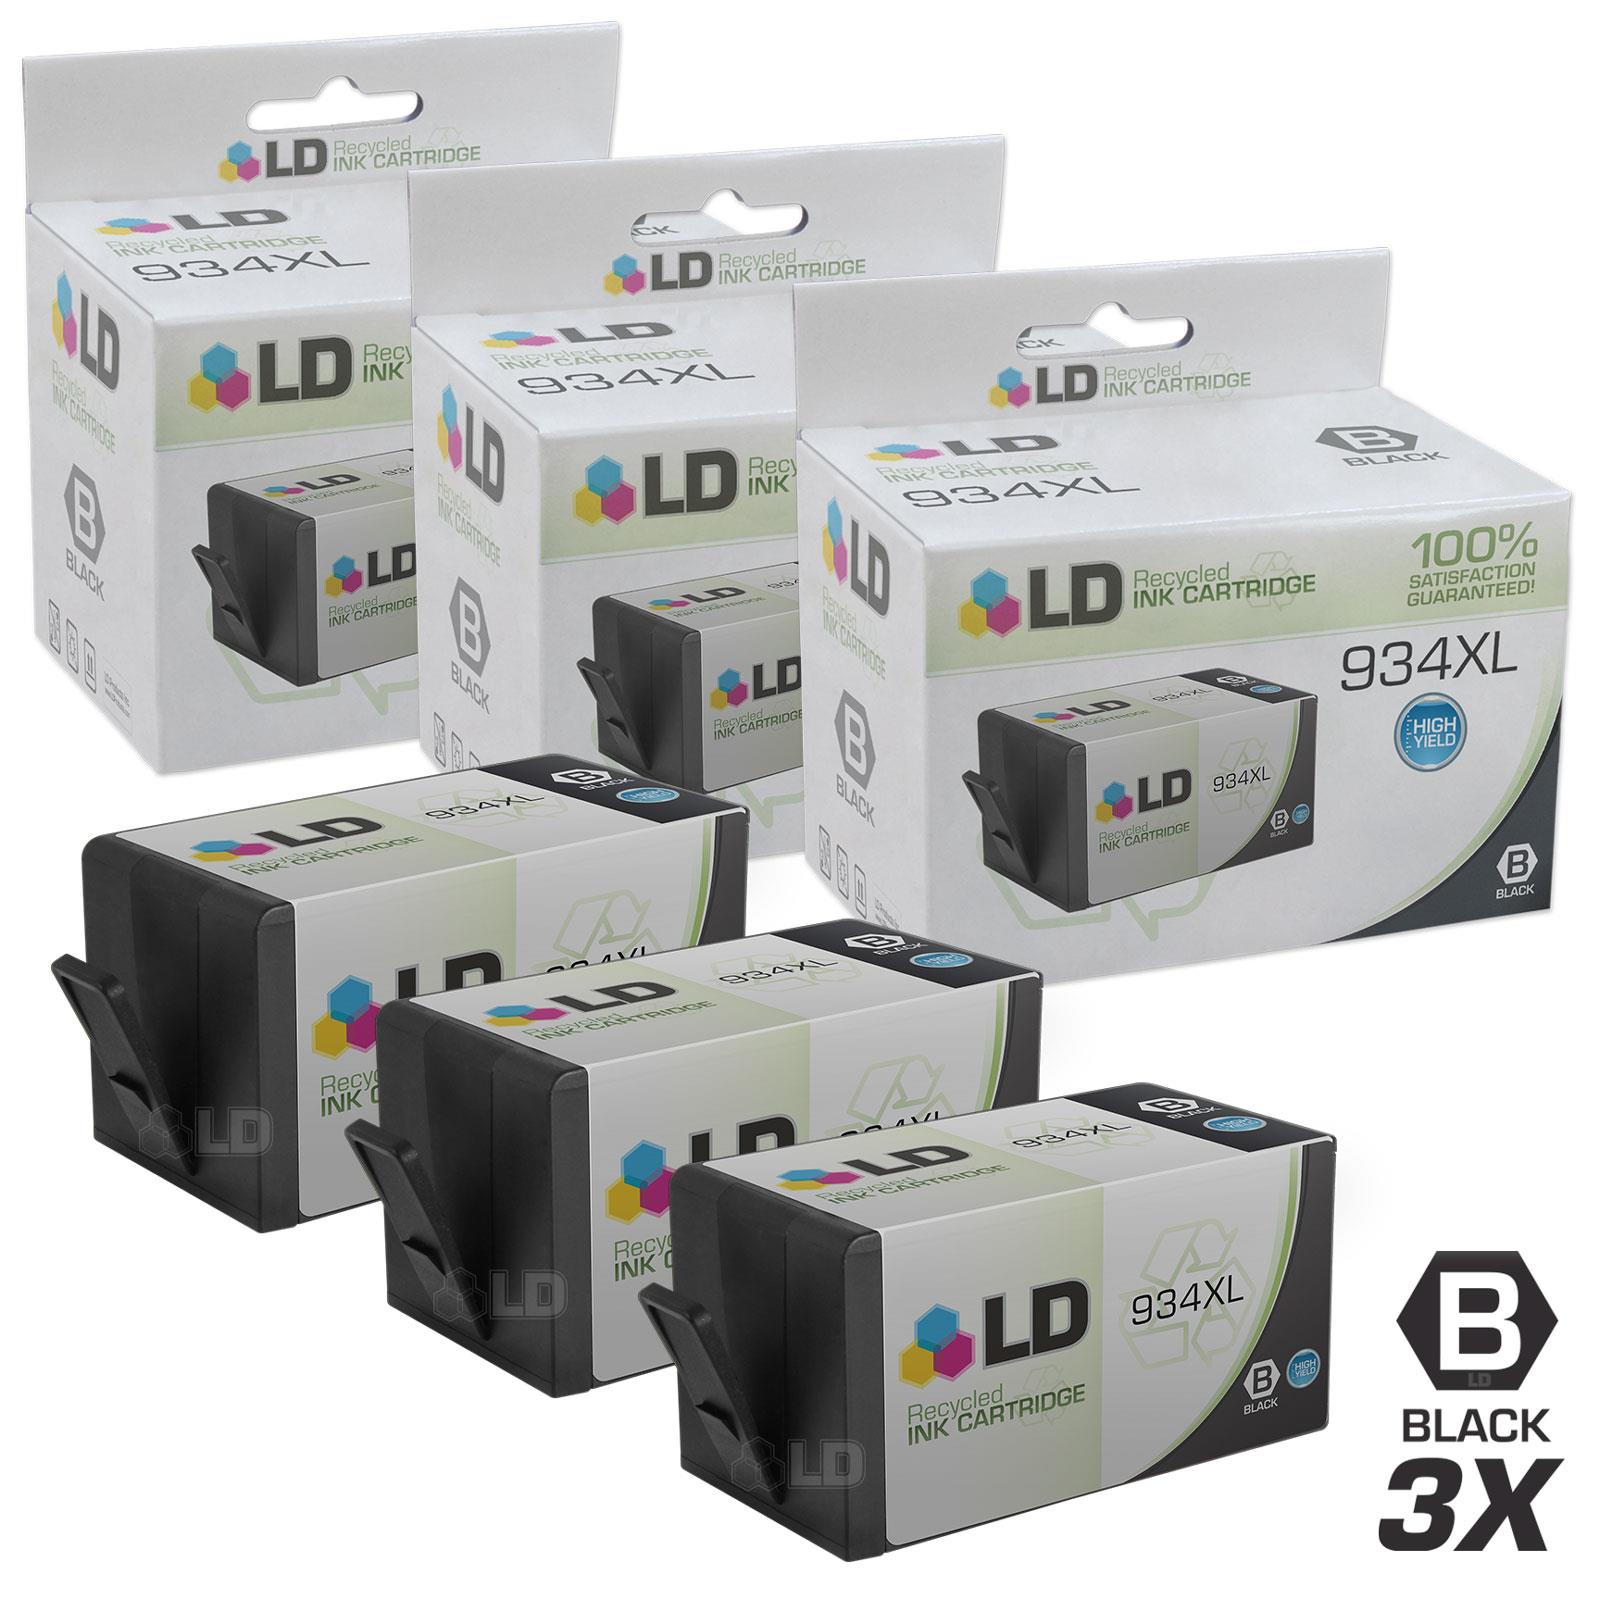 LD © Remanufactured Replacements for Hewlett Packard C2P23AN / 934XL / 934 XL  Set of 3 Black Ink Cartridges for use in HP OfficeJet 6812, 6815, and OfficeJet Pro 6230, 6830, and 6835 Printers